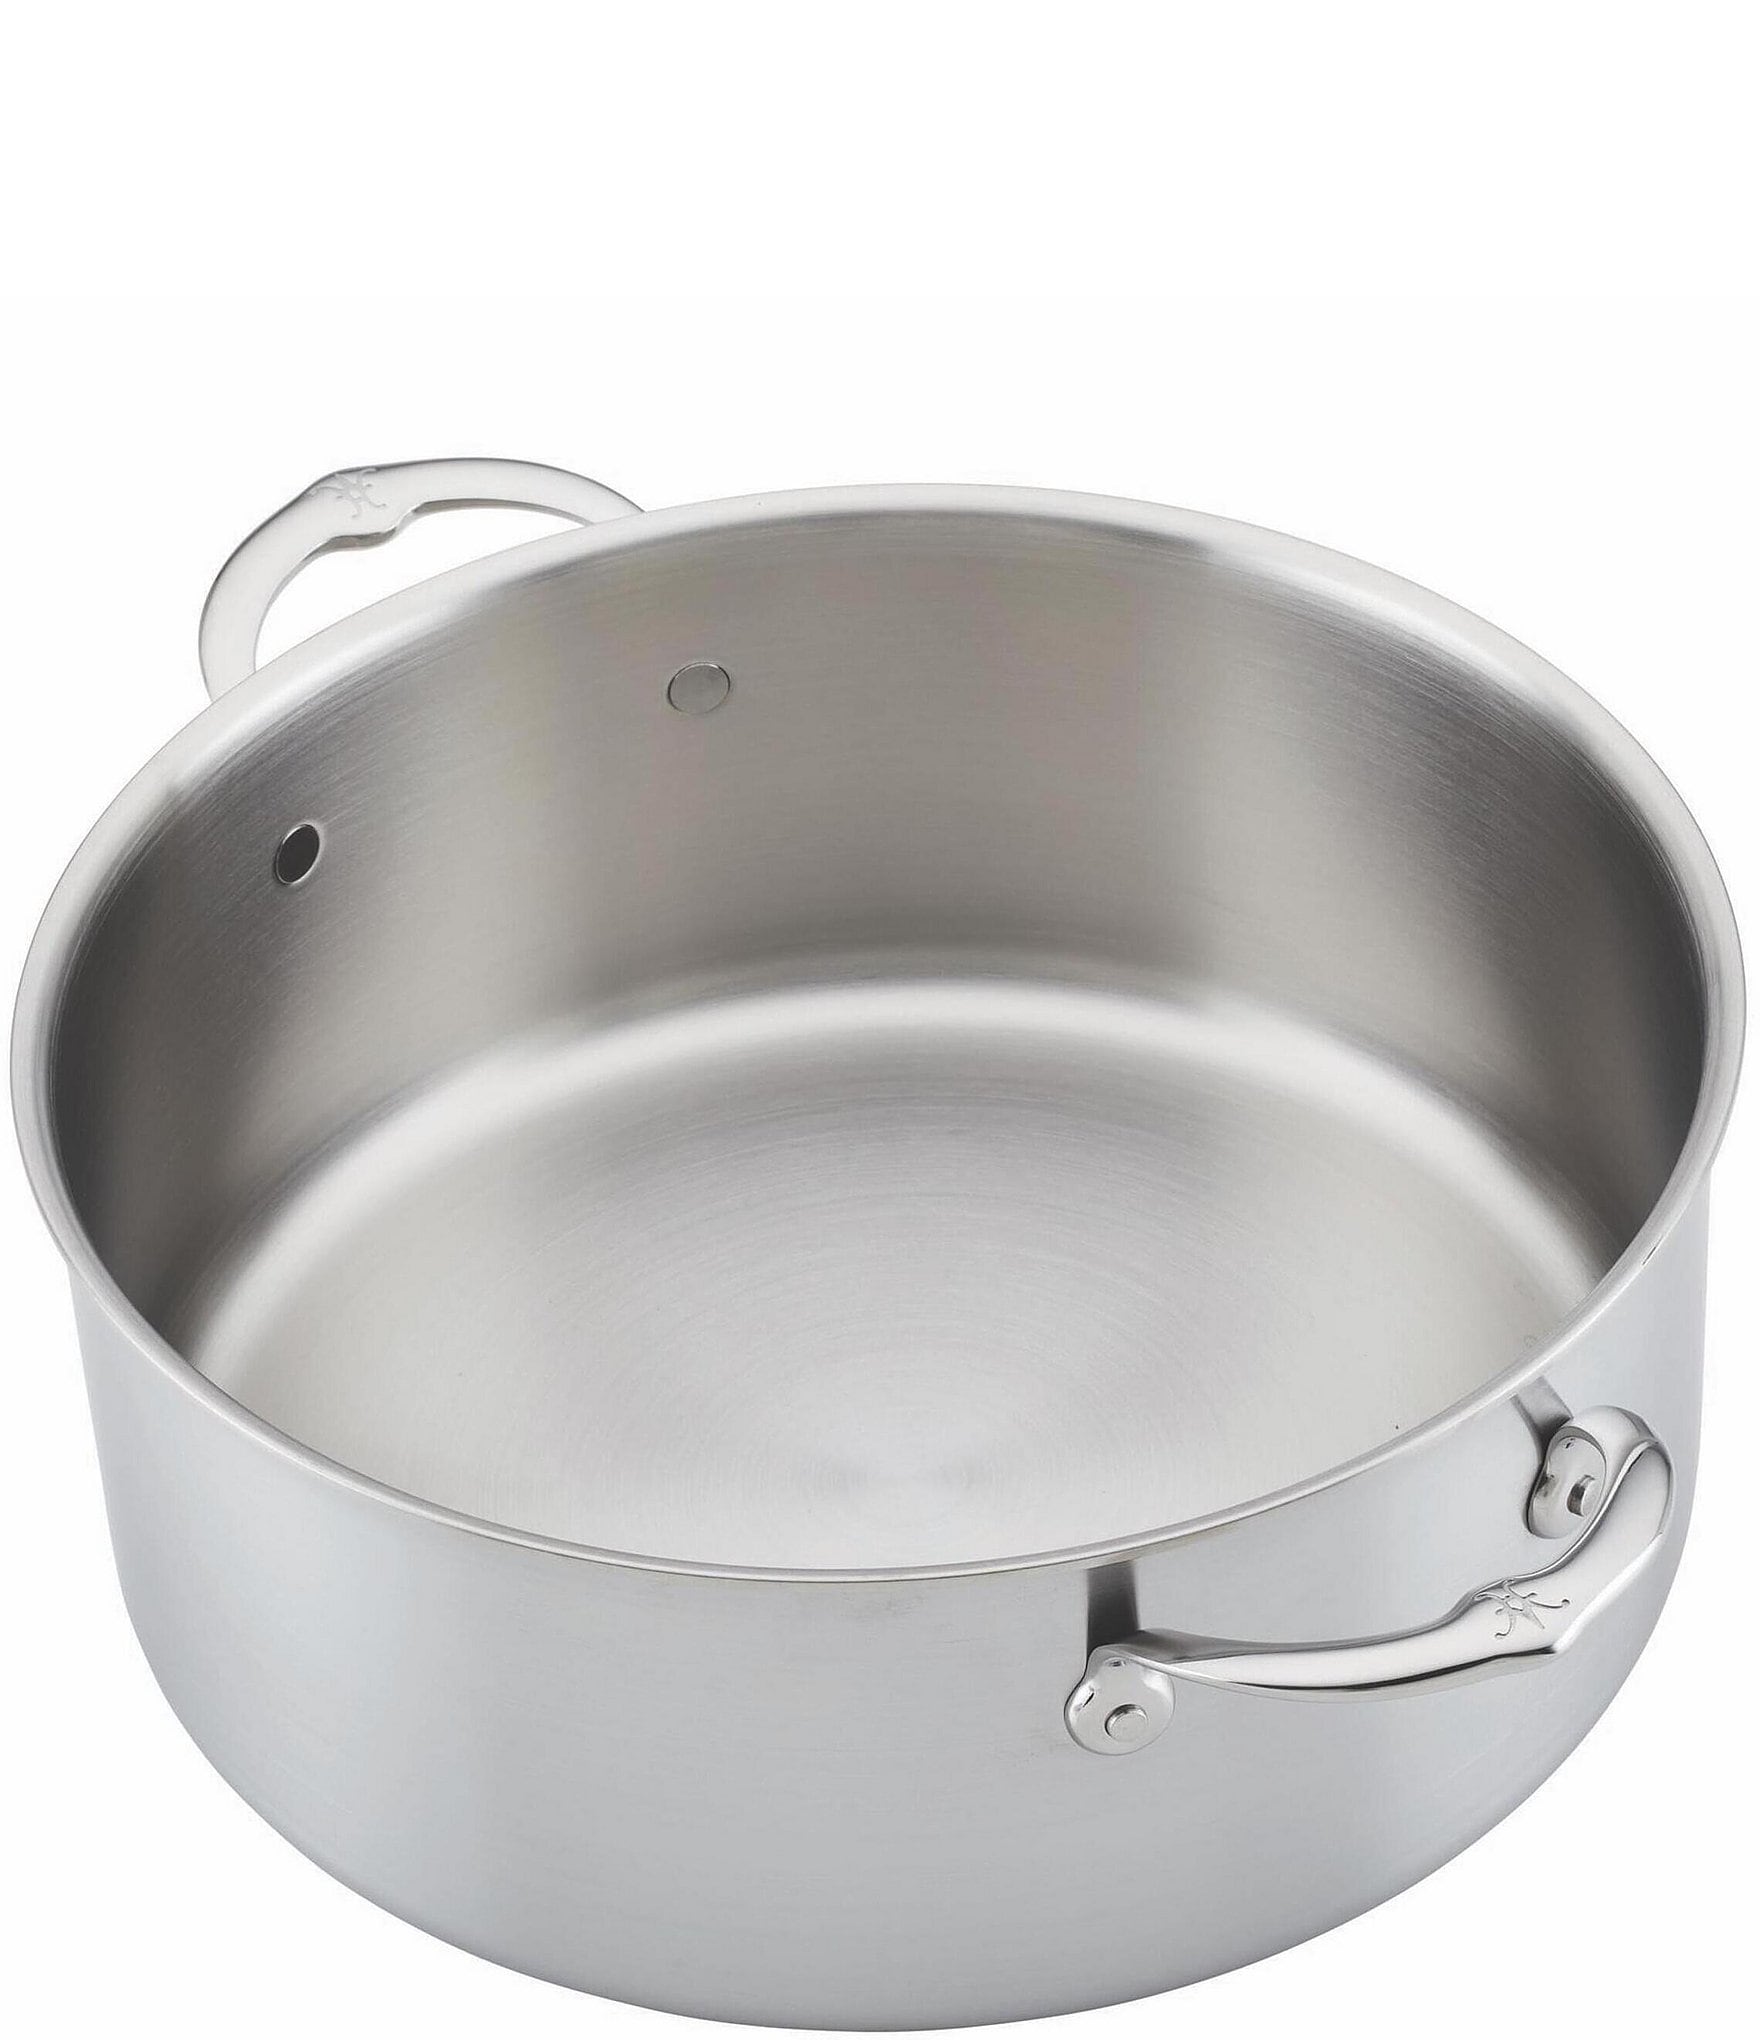 Fissler Pure Collection Stainless Steel Rondeau, 2.7 Quart With